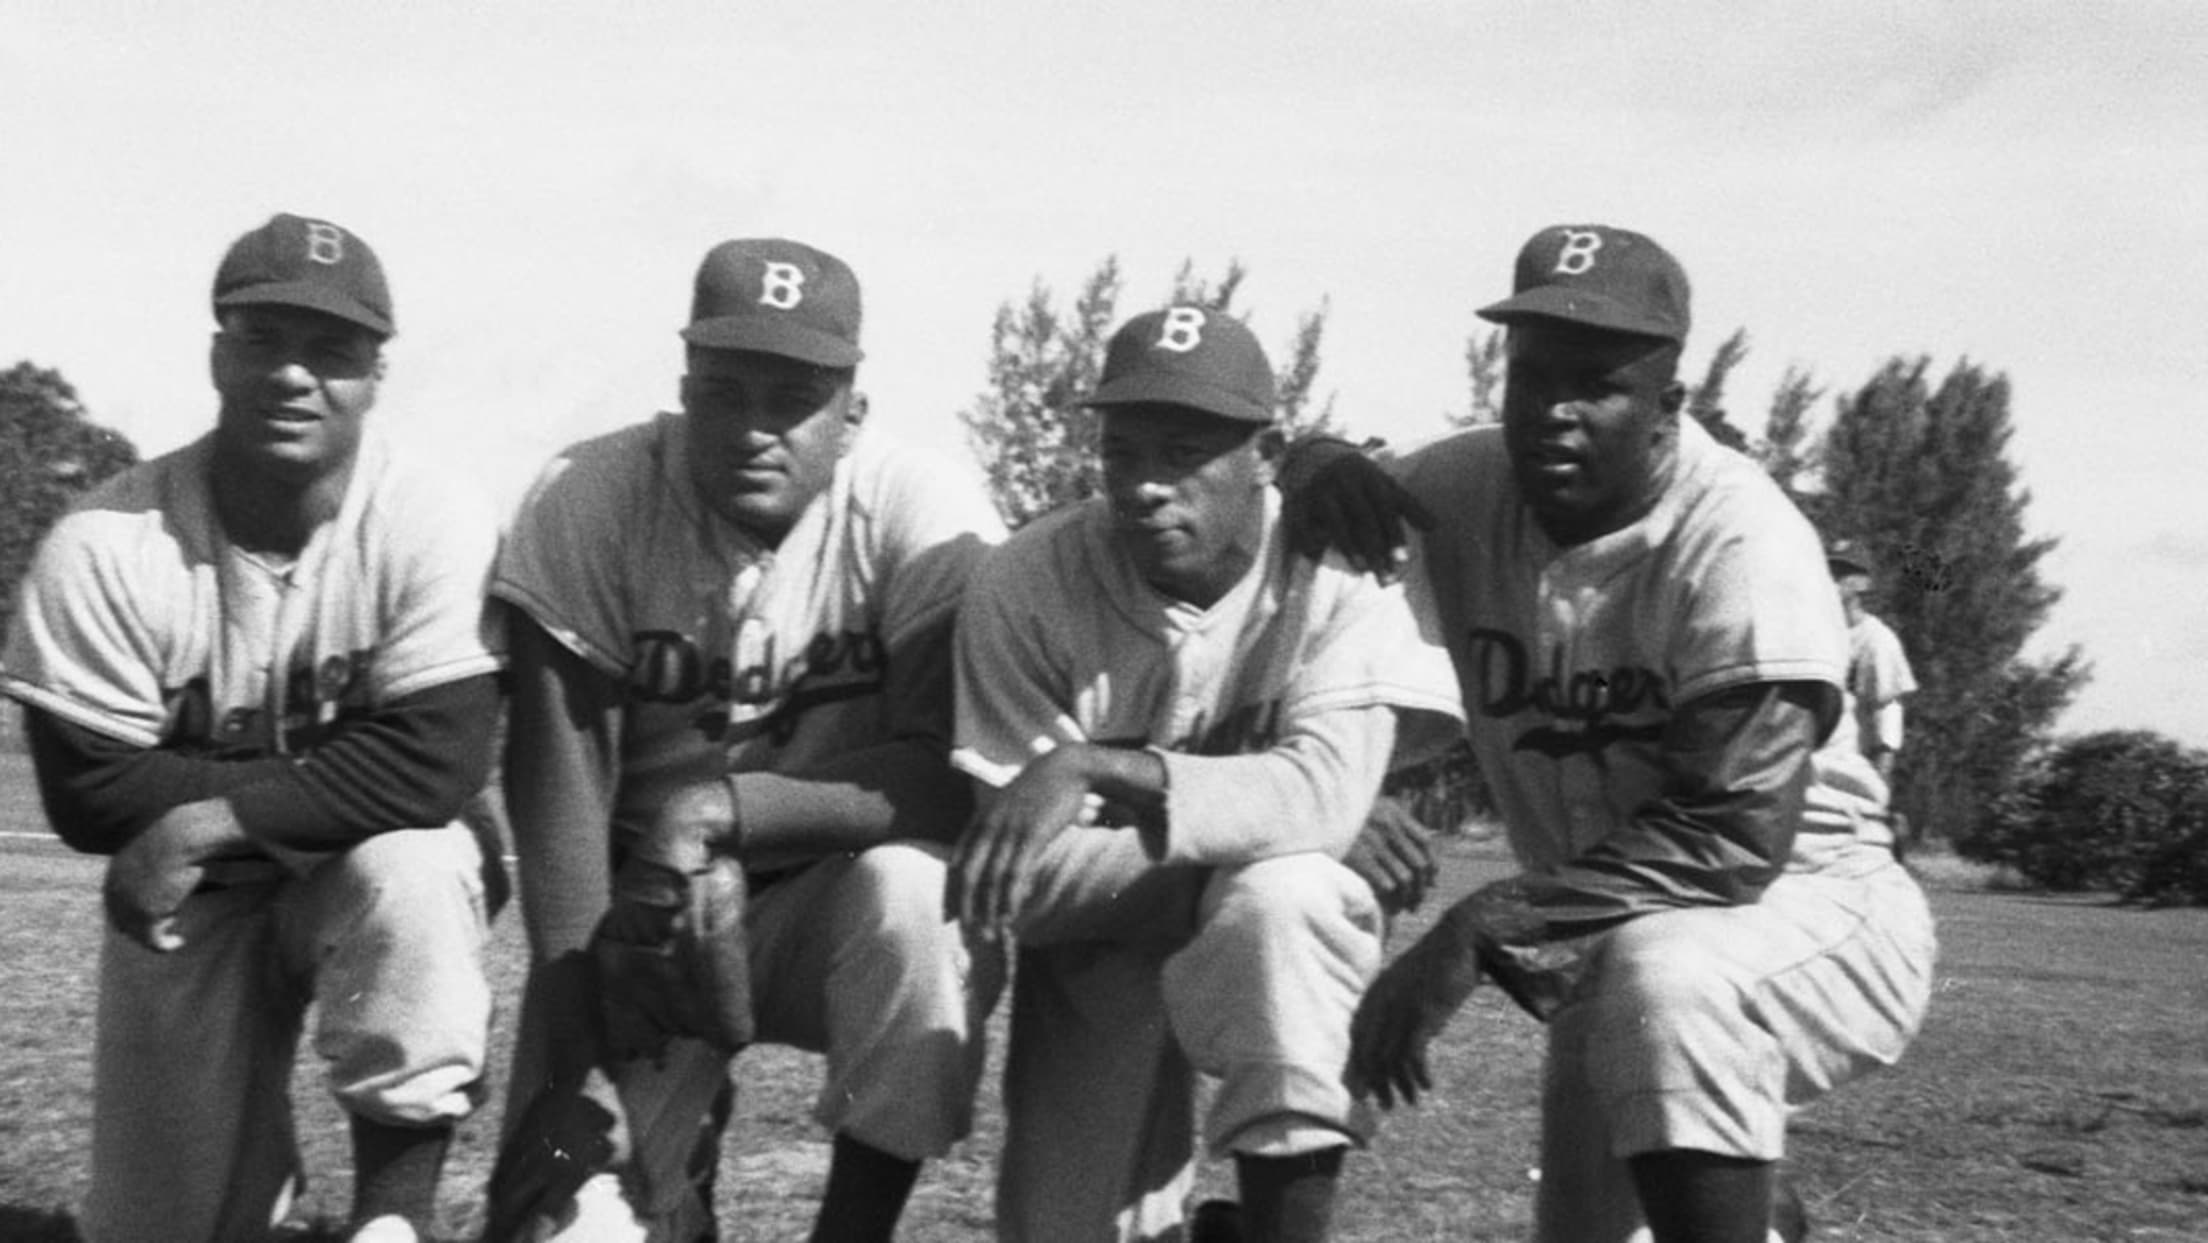 On Jackie Robinson Day, the Yankees must answer for Jim Crow